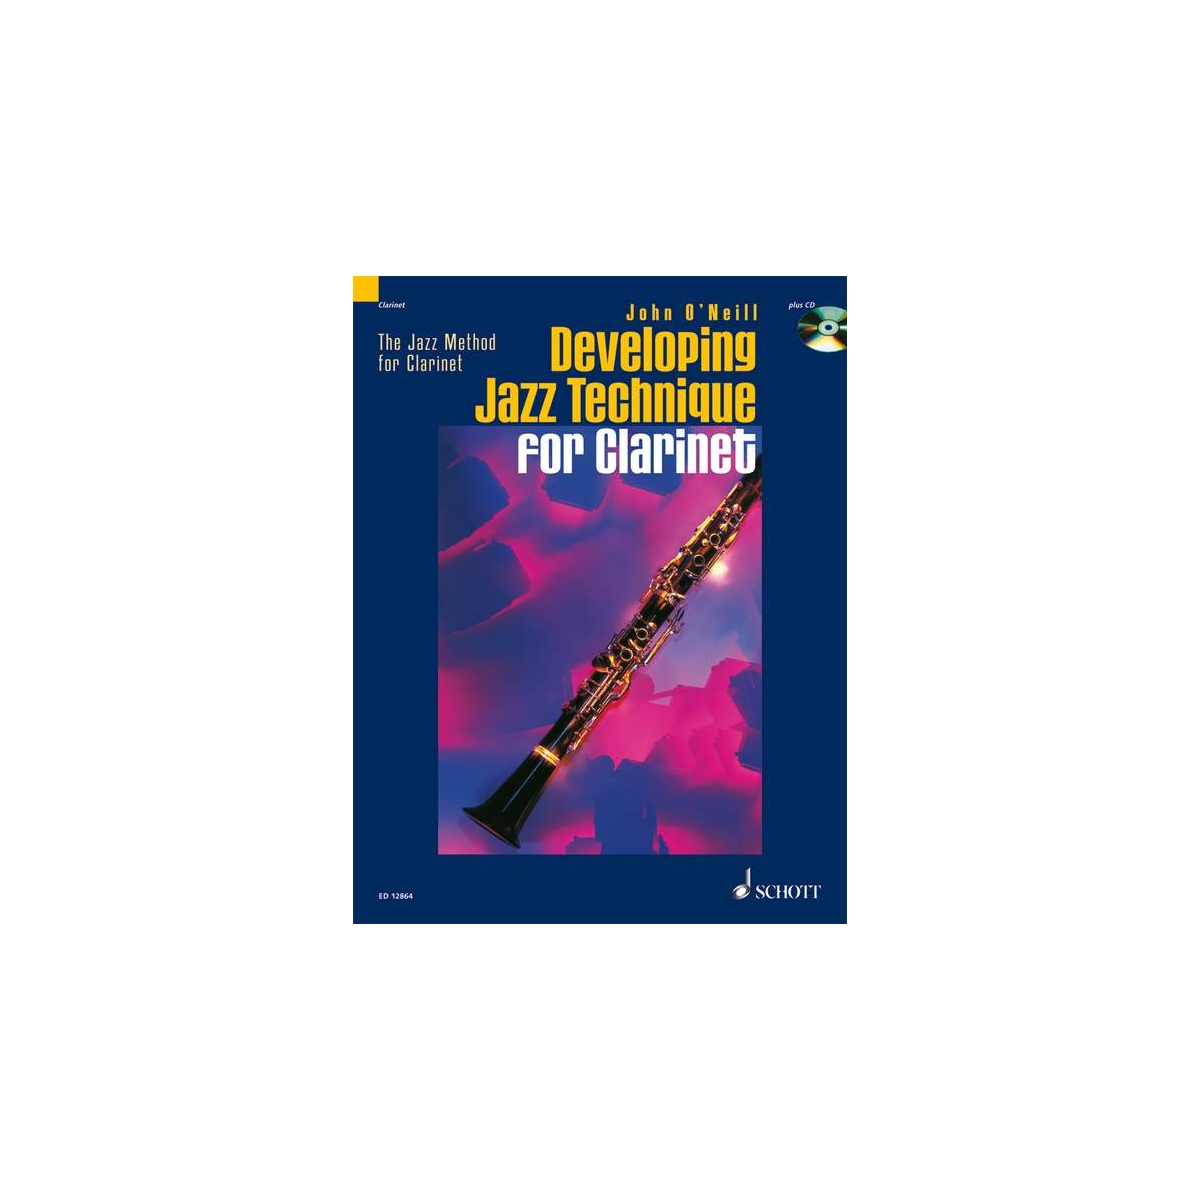 Developing Jazz Technique for Clarinet